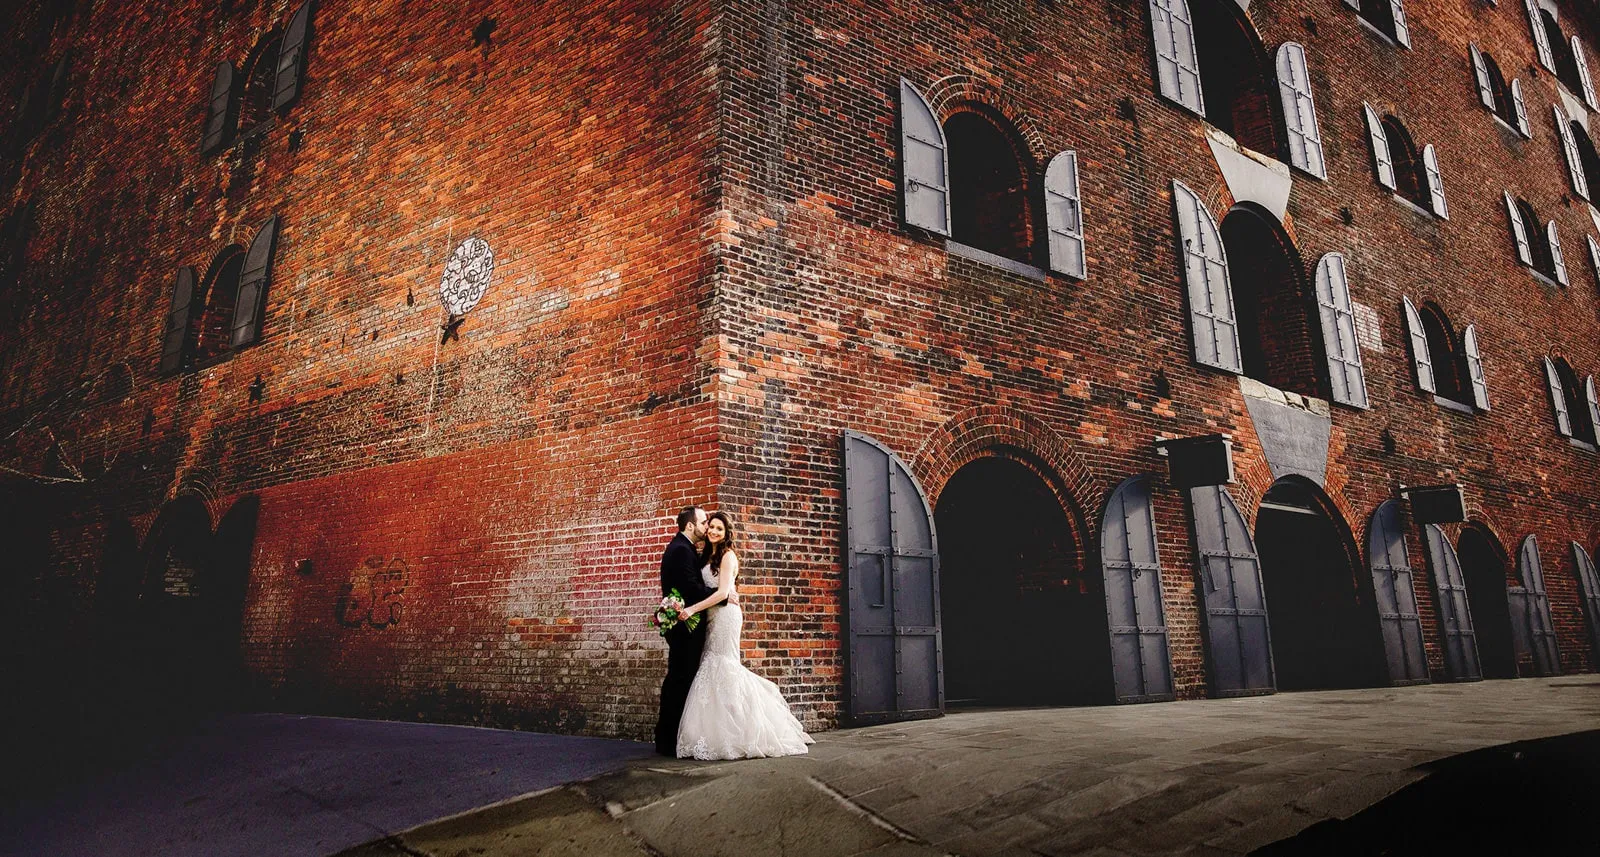 Couple posing for a portrait in front of a brick building